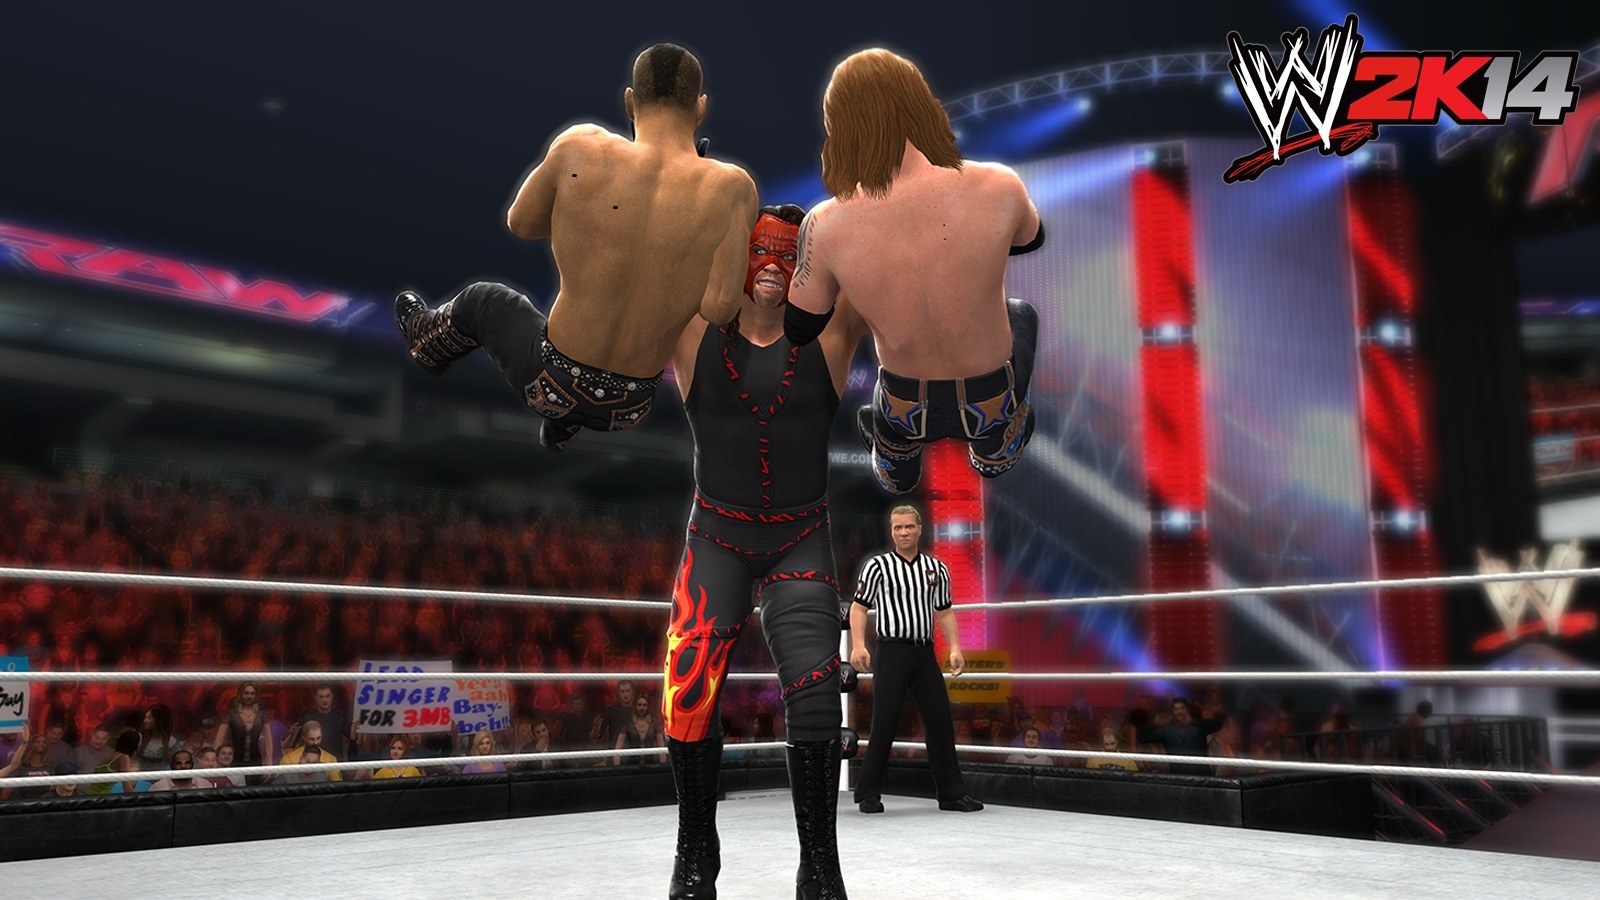 Post here your mods and tools, and discuss anything related to WWE 2K14 mod...